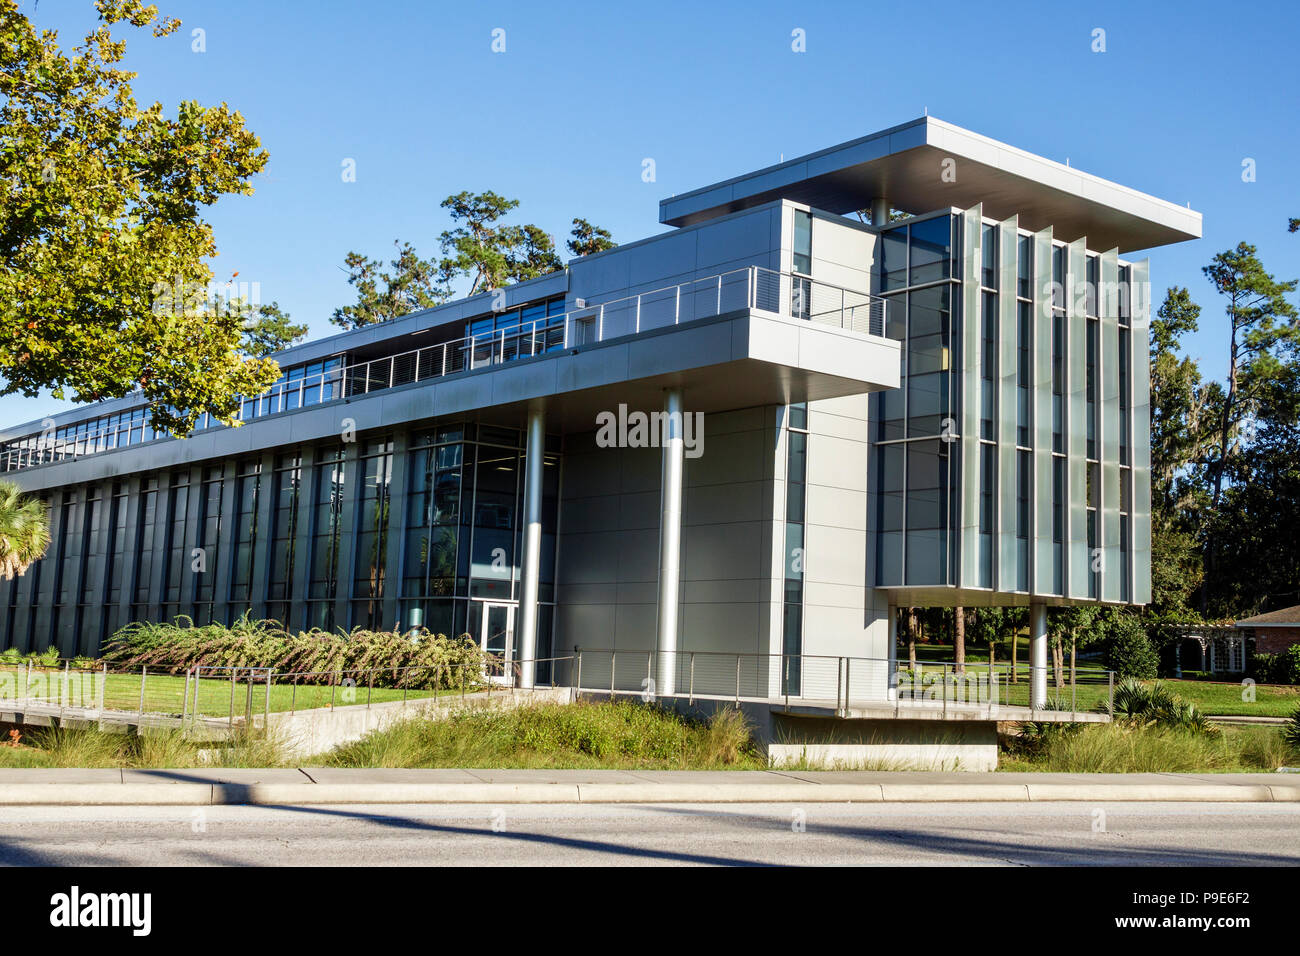 Gainesville Florida,Mowry Road,University of Florida,campus,Clinical & Translational Science Institute,Biomedical Research Facility,Building,Exterior, Foto Stock